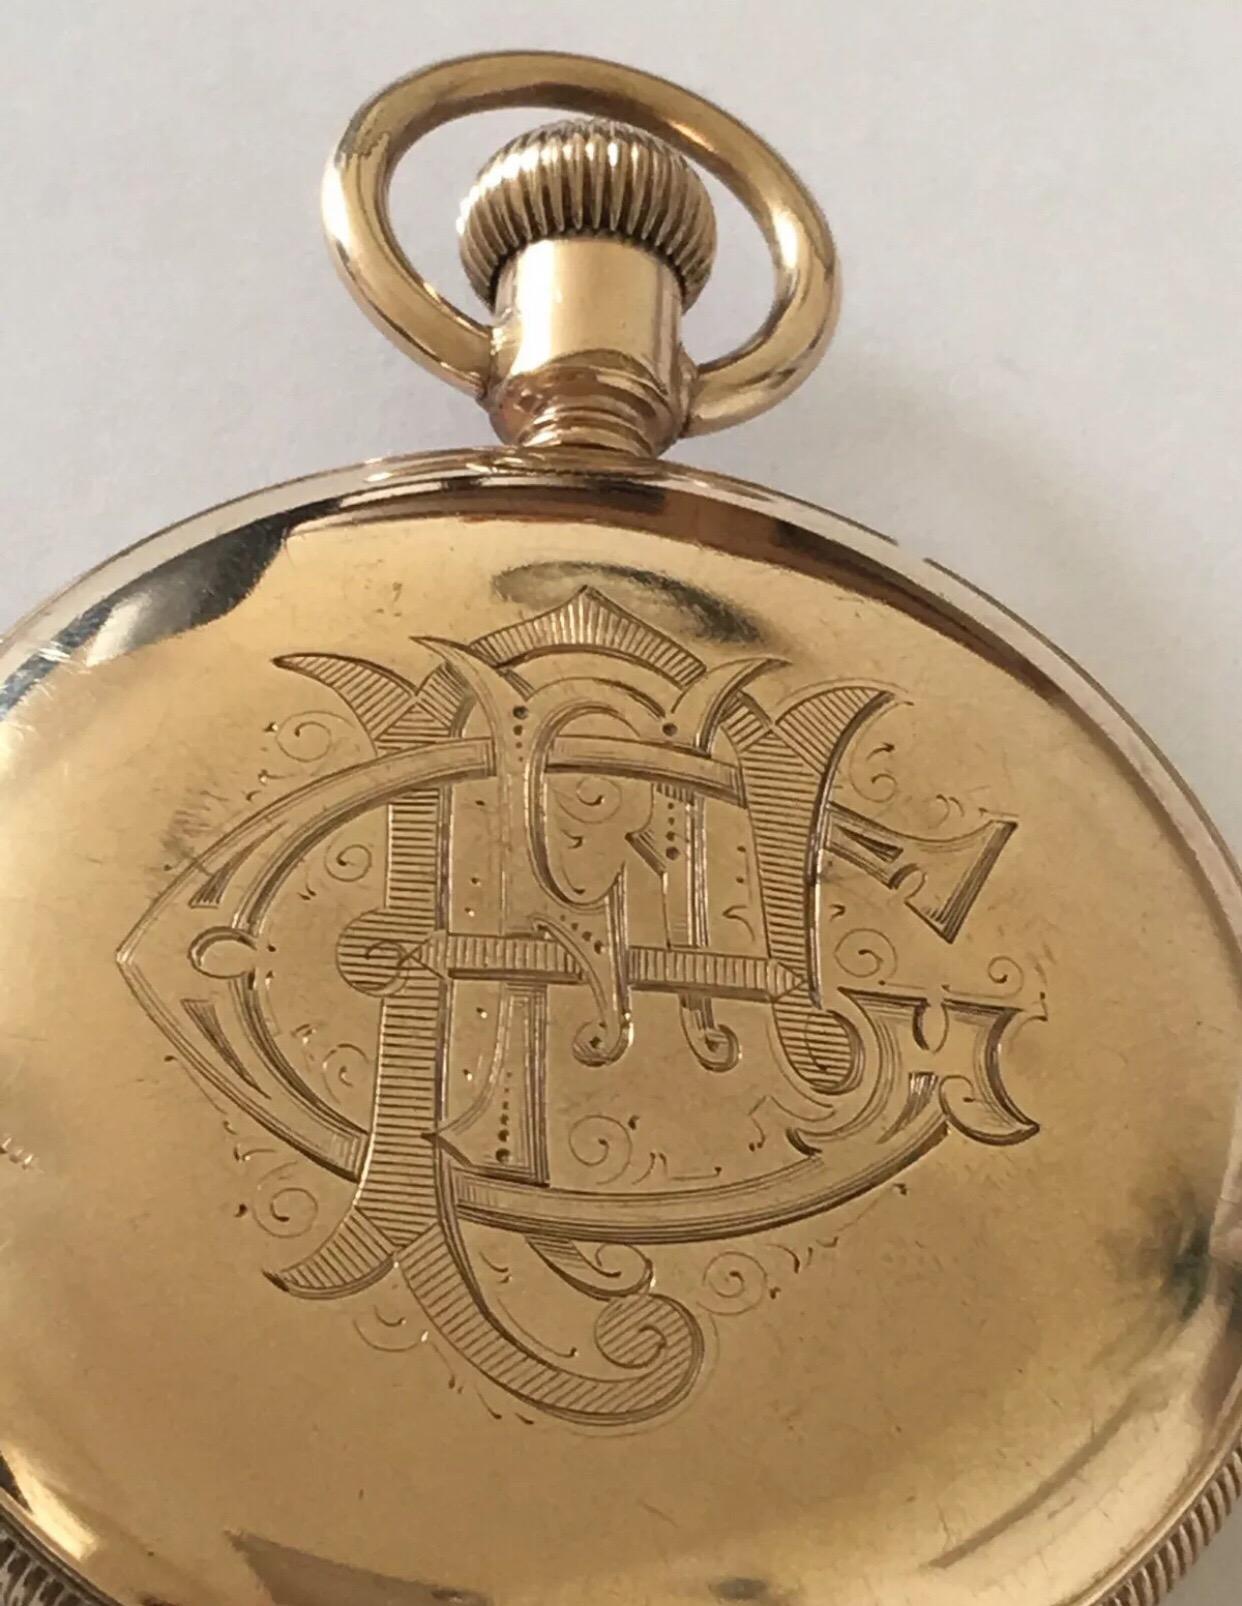 Antique Gold Filled Duplex Pocket Watch by Charles Benedict Waterbury Watch Co For Sale 1